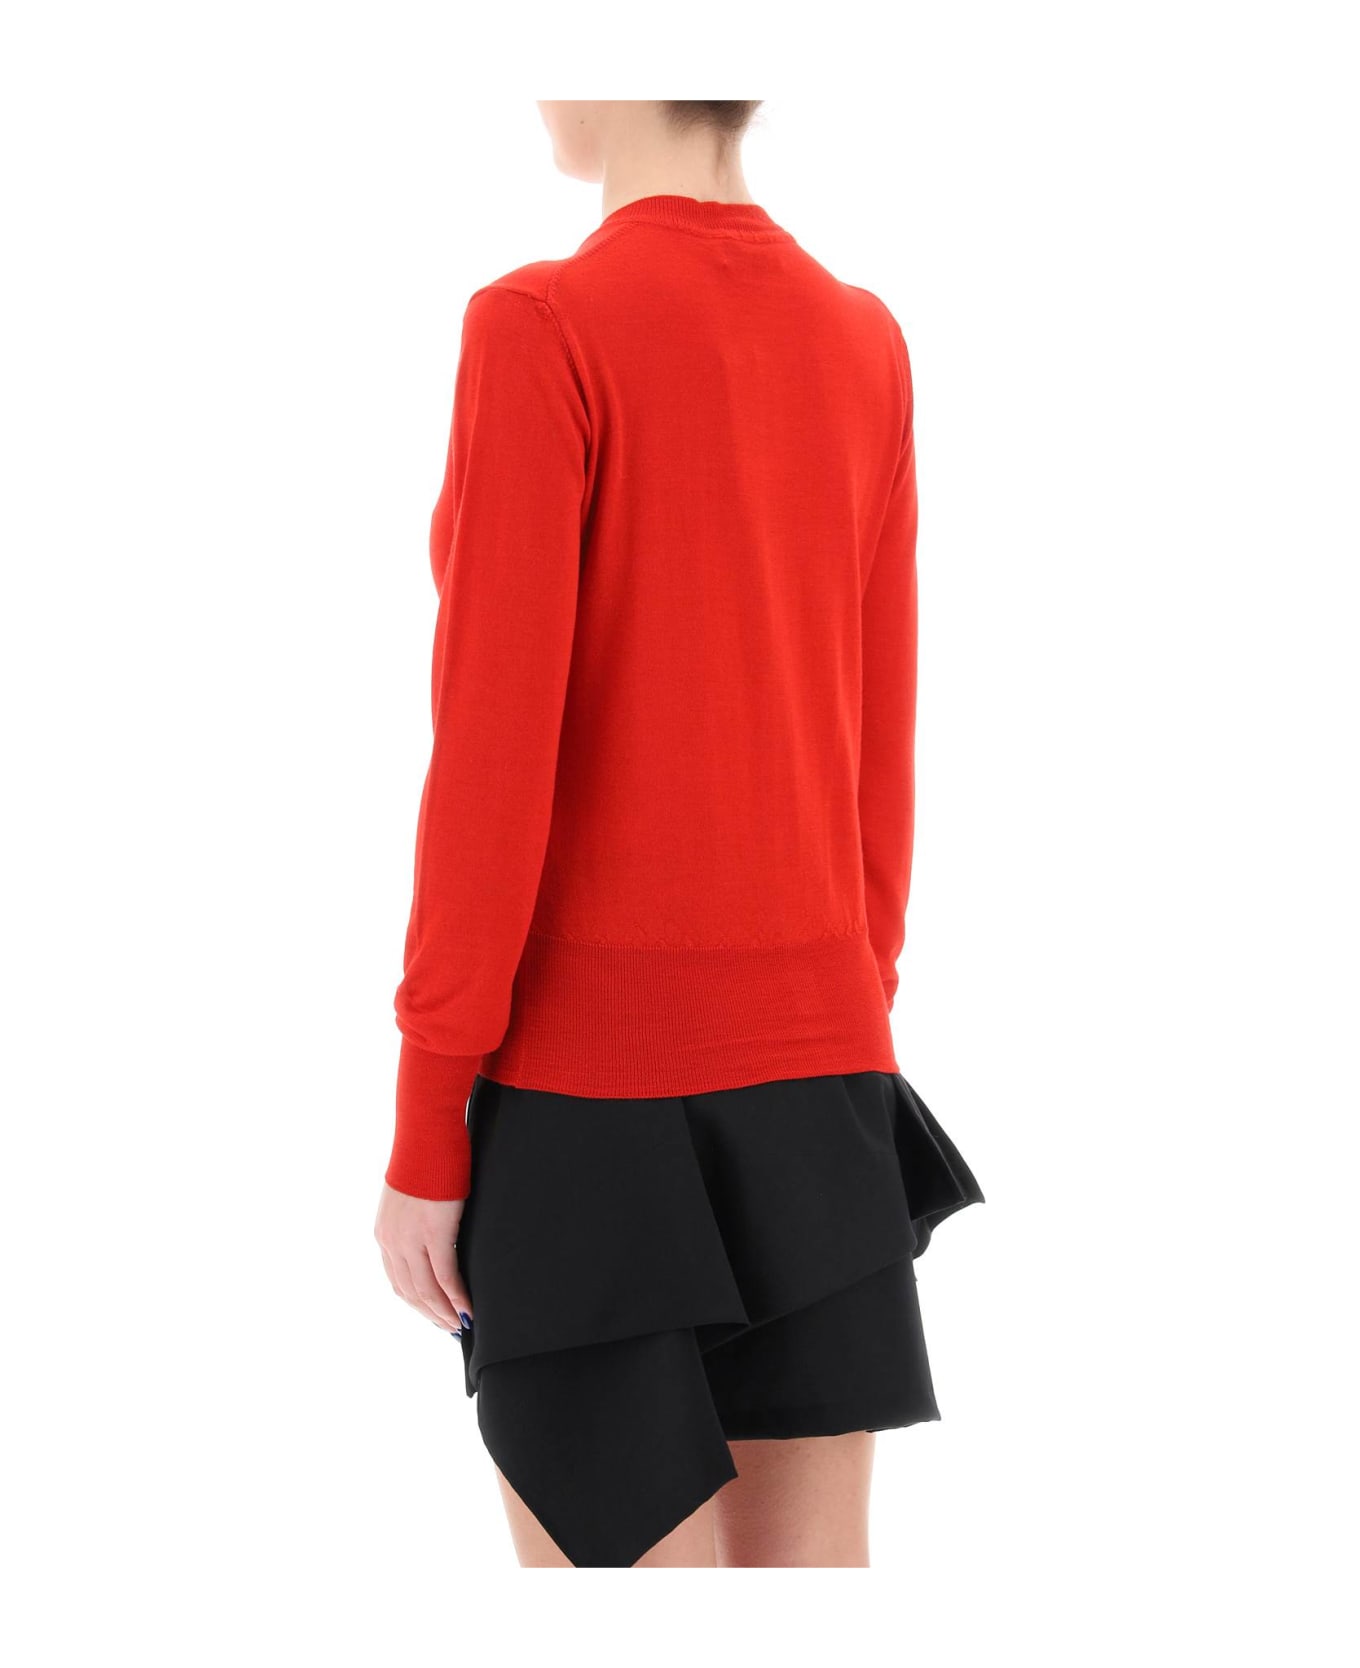 Vivienne Westwood Bea Cardigan With Embroidered Logo - RED (Red)